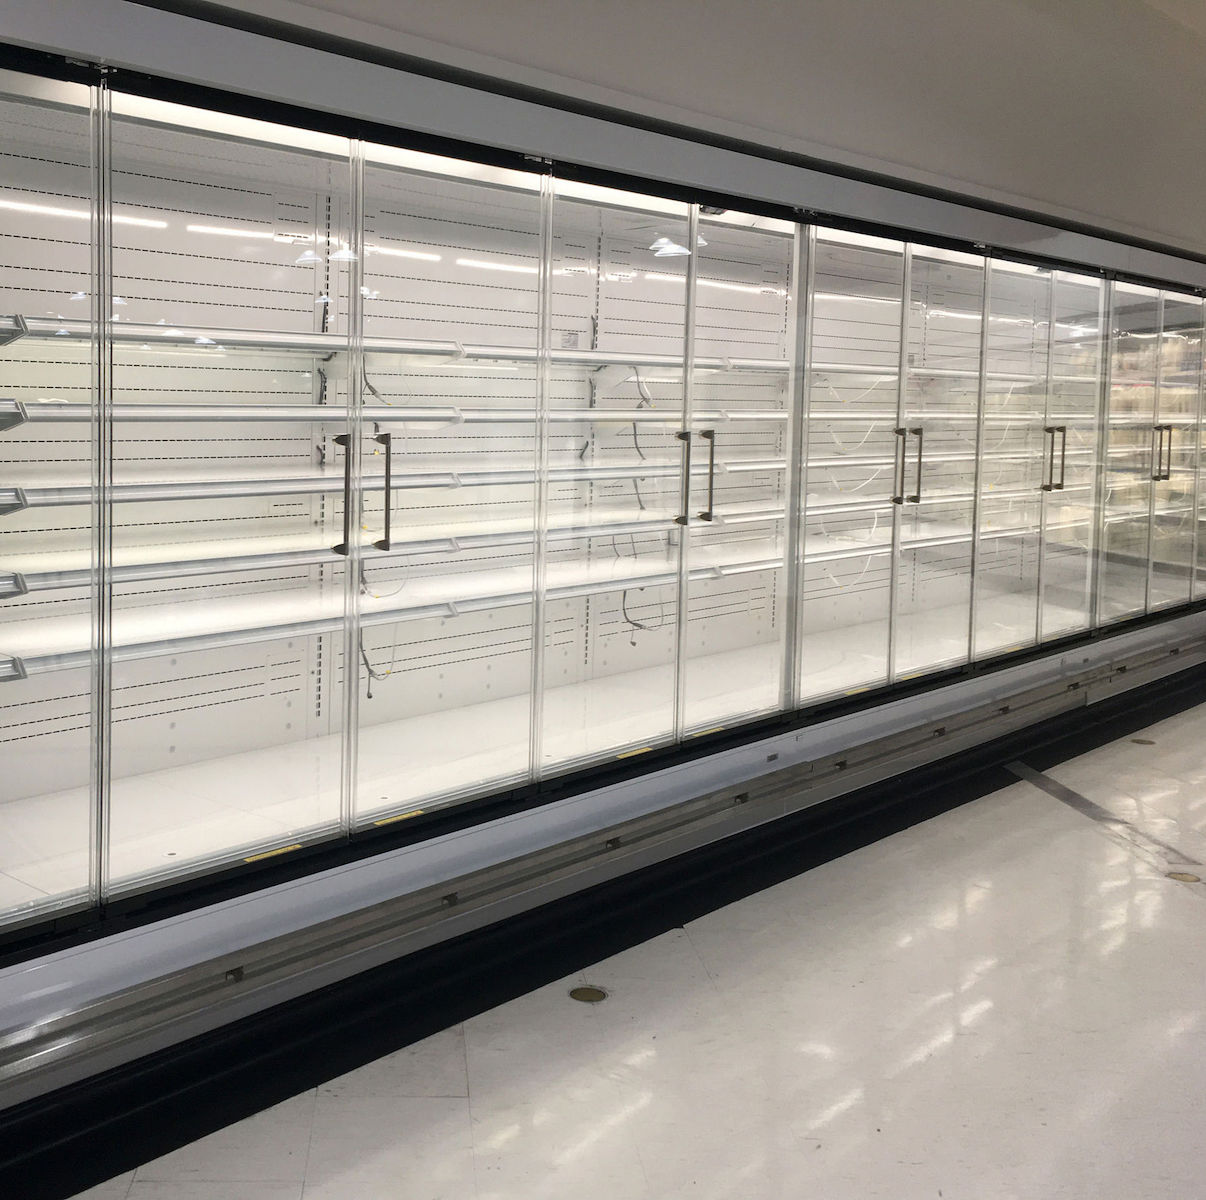 commercial refrigeration units and display fridges for shops and supermarkets